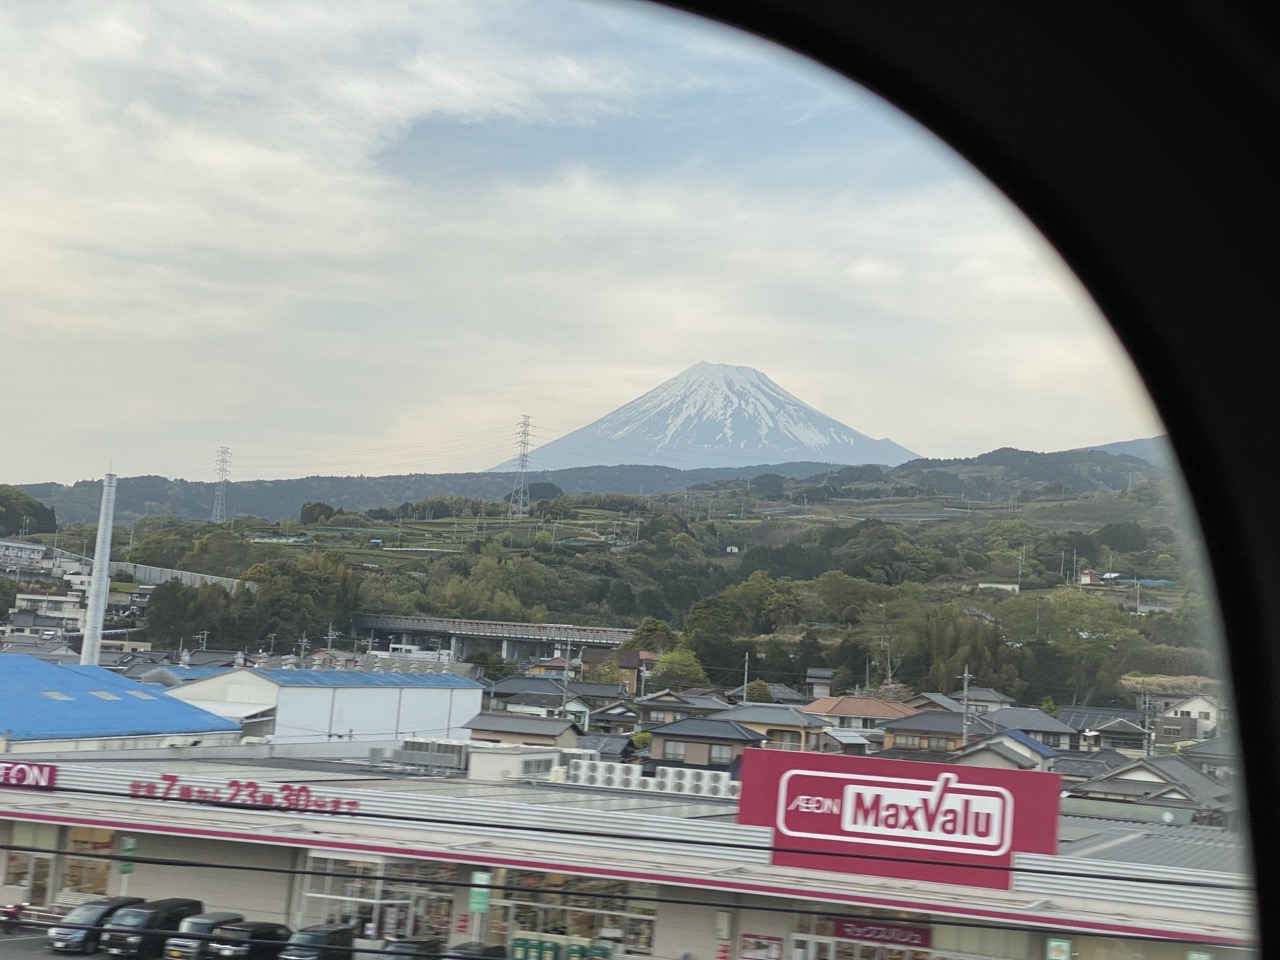 Mt Fuji in the distance seen from a train window.